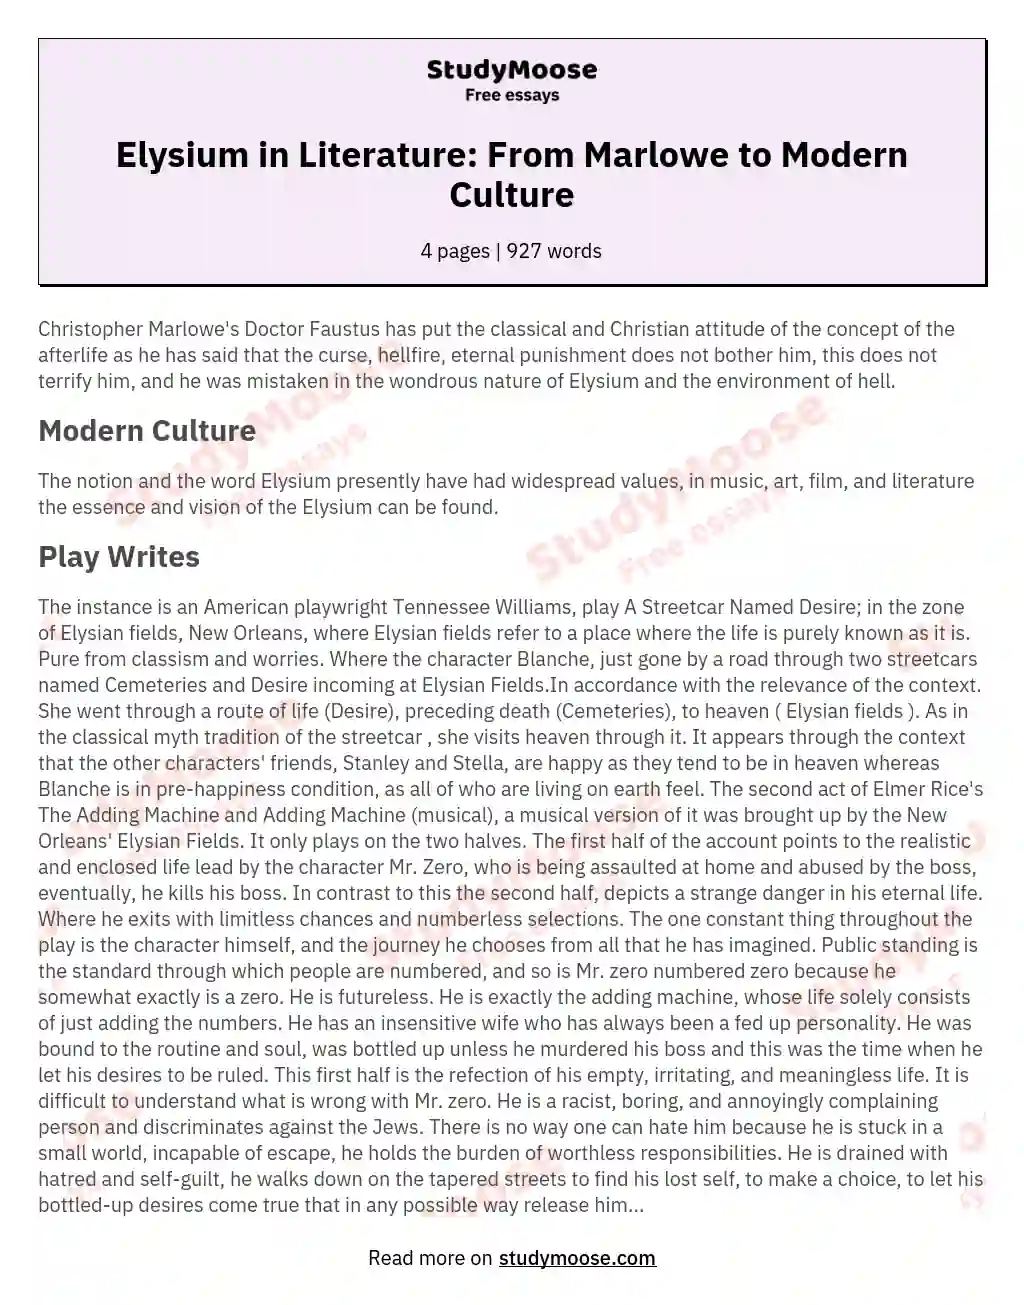 Elysium in Literature: From Marlowe to Modern Culture essay